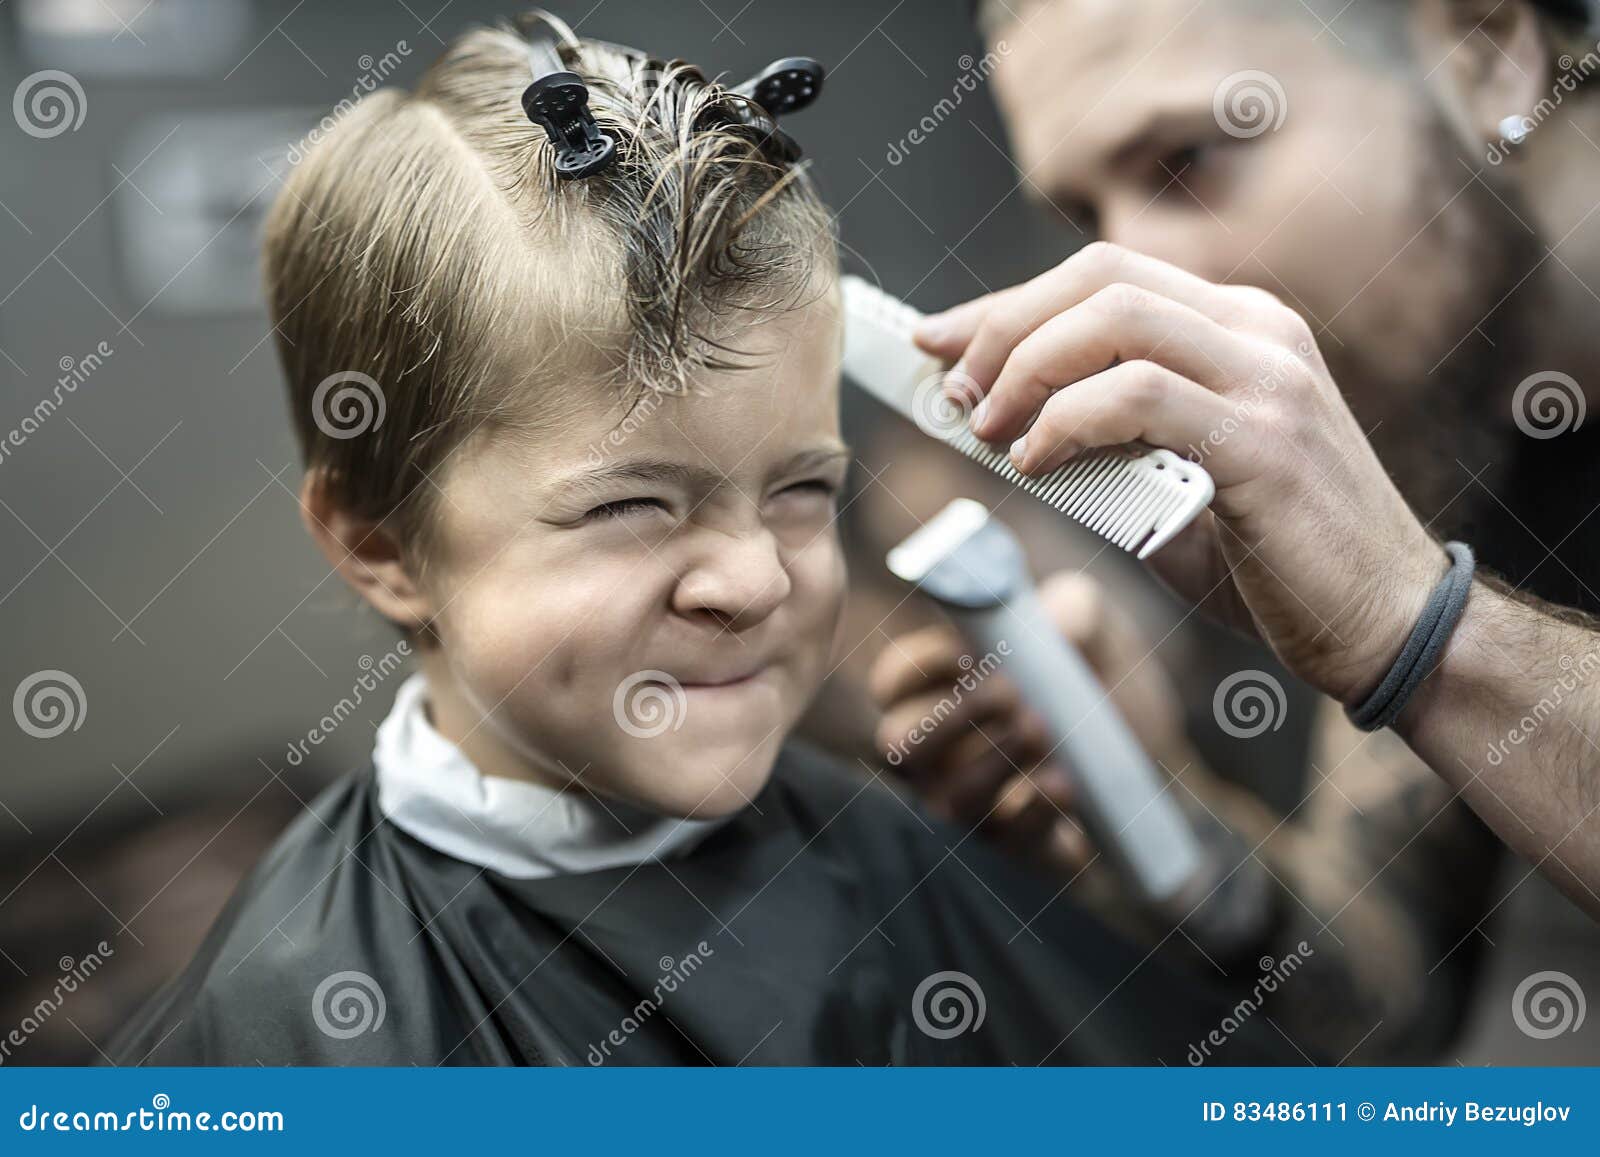 Small kid in barbershop stock image. Image of little - 83486111